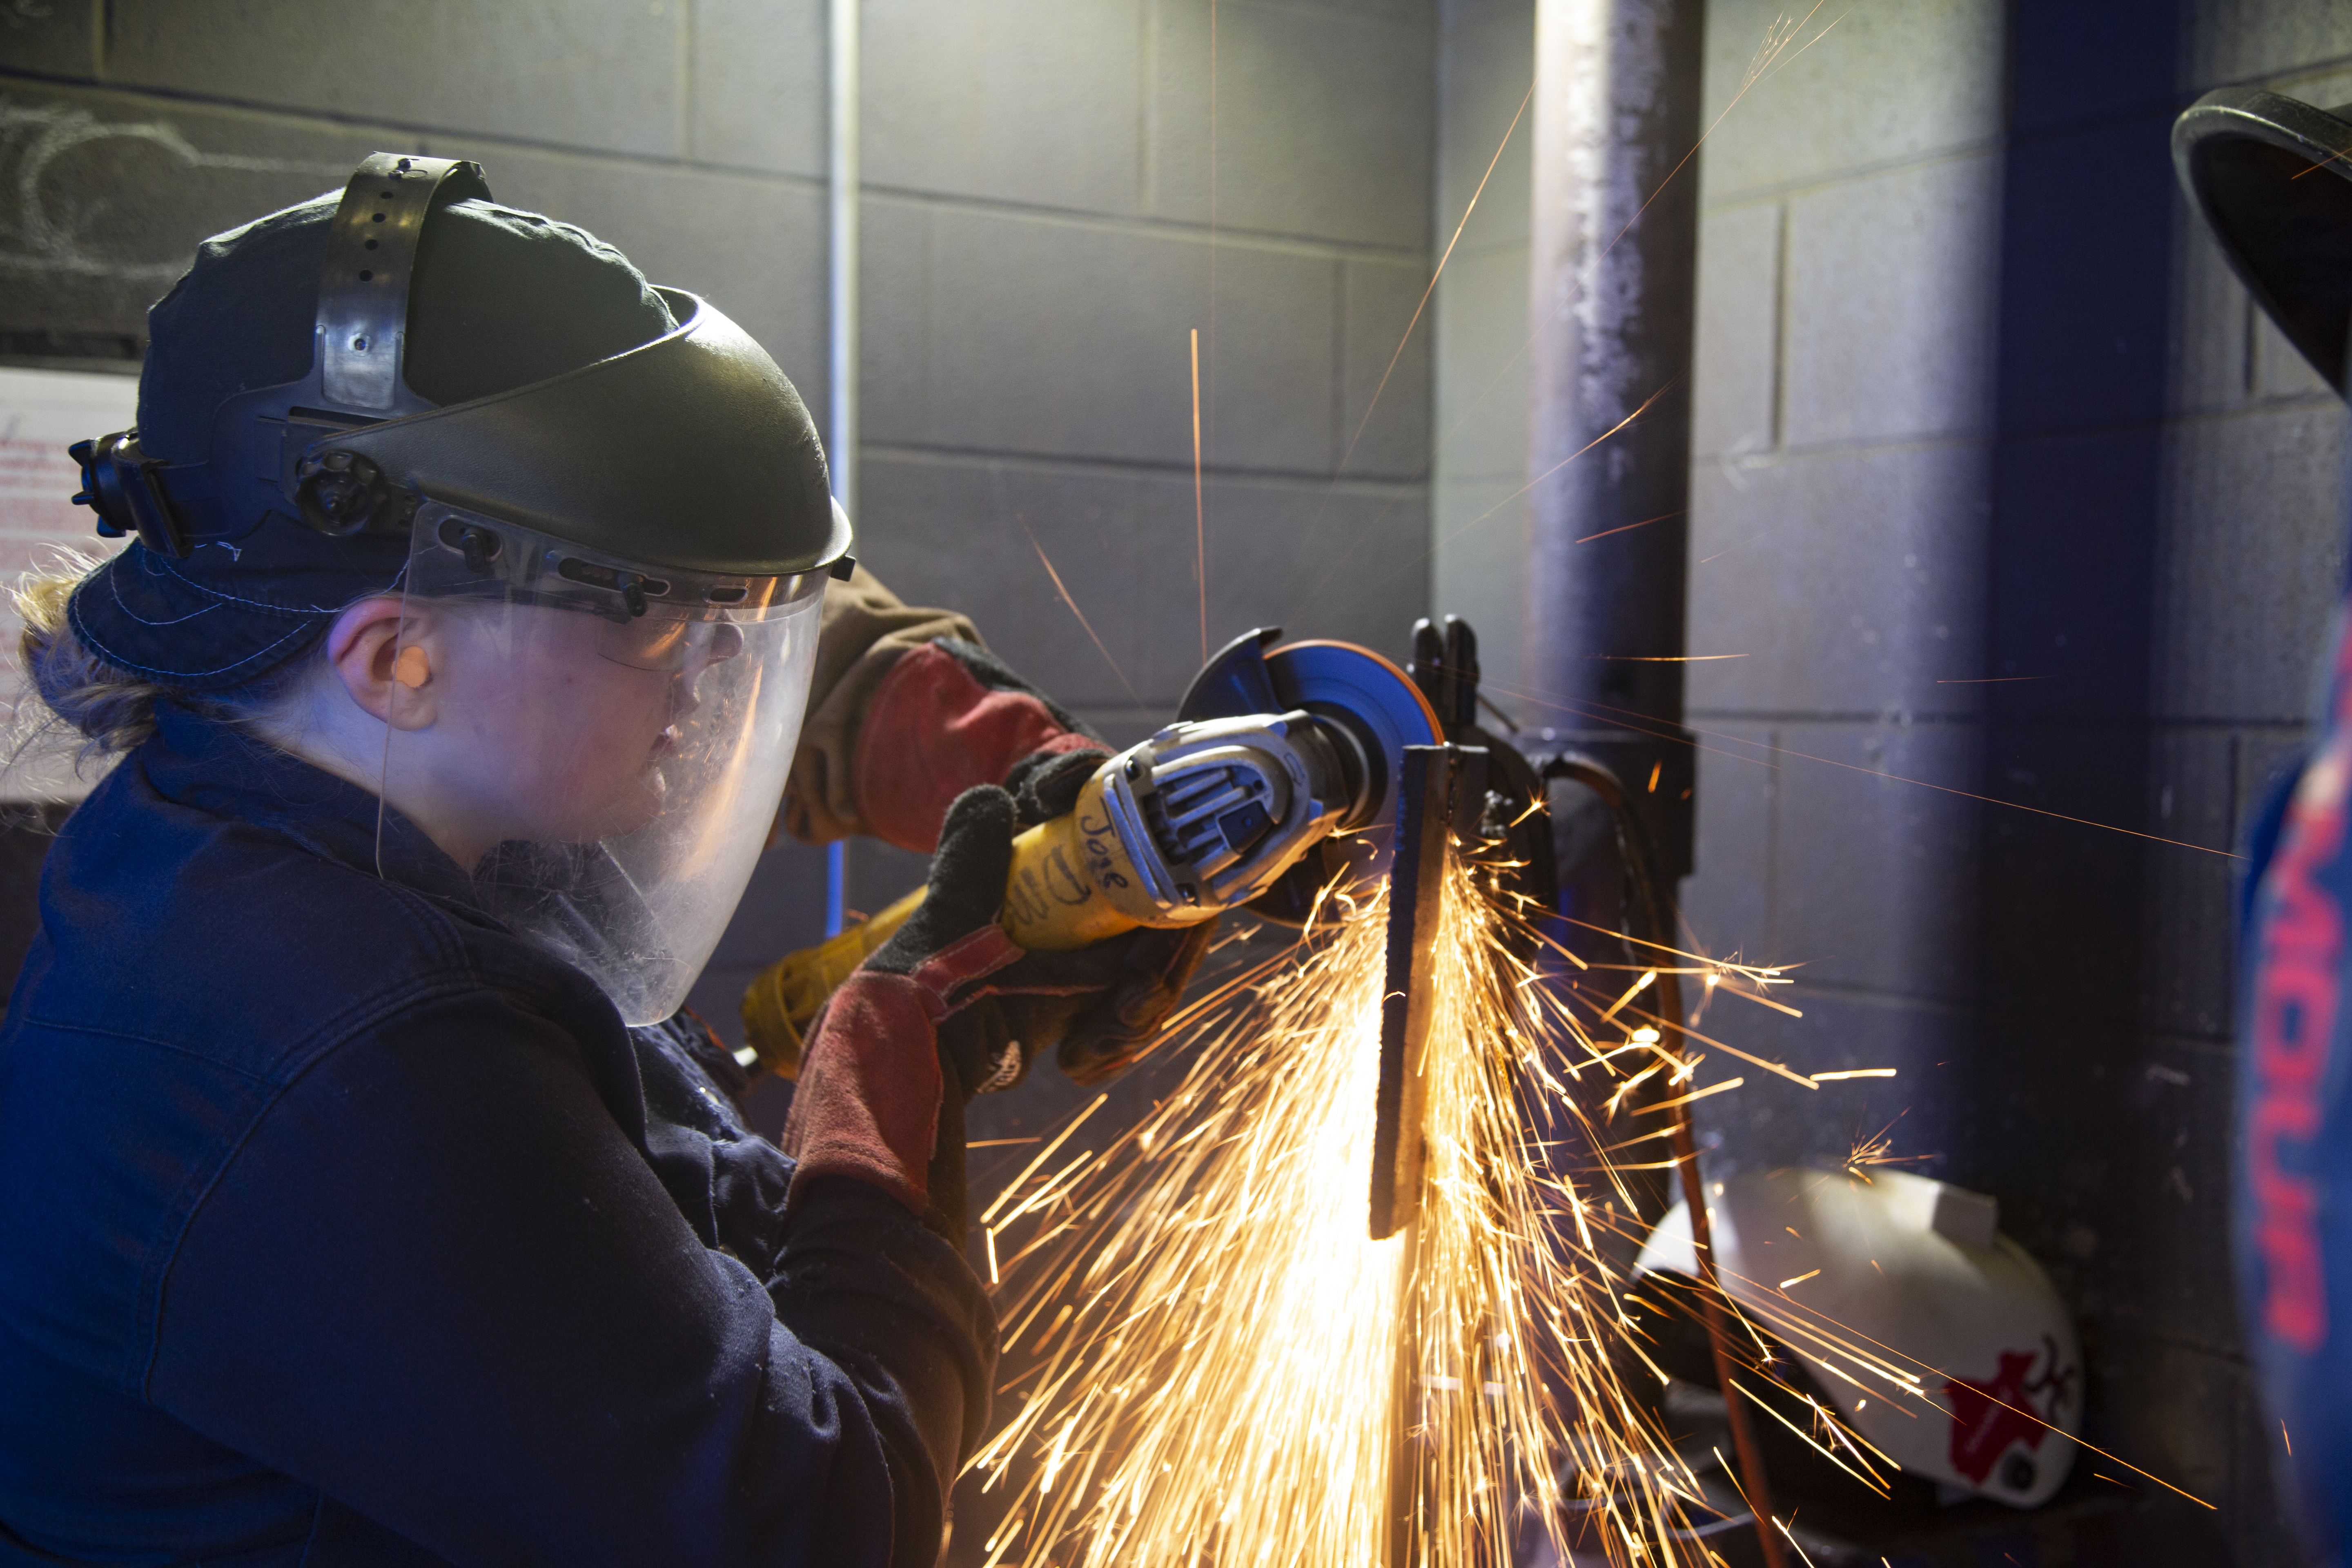 Sparks fly as a student wearing safety gear welds pipe